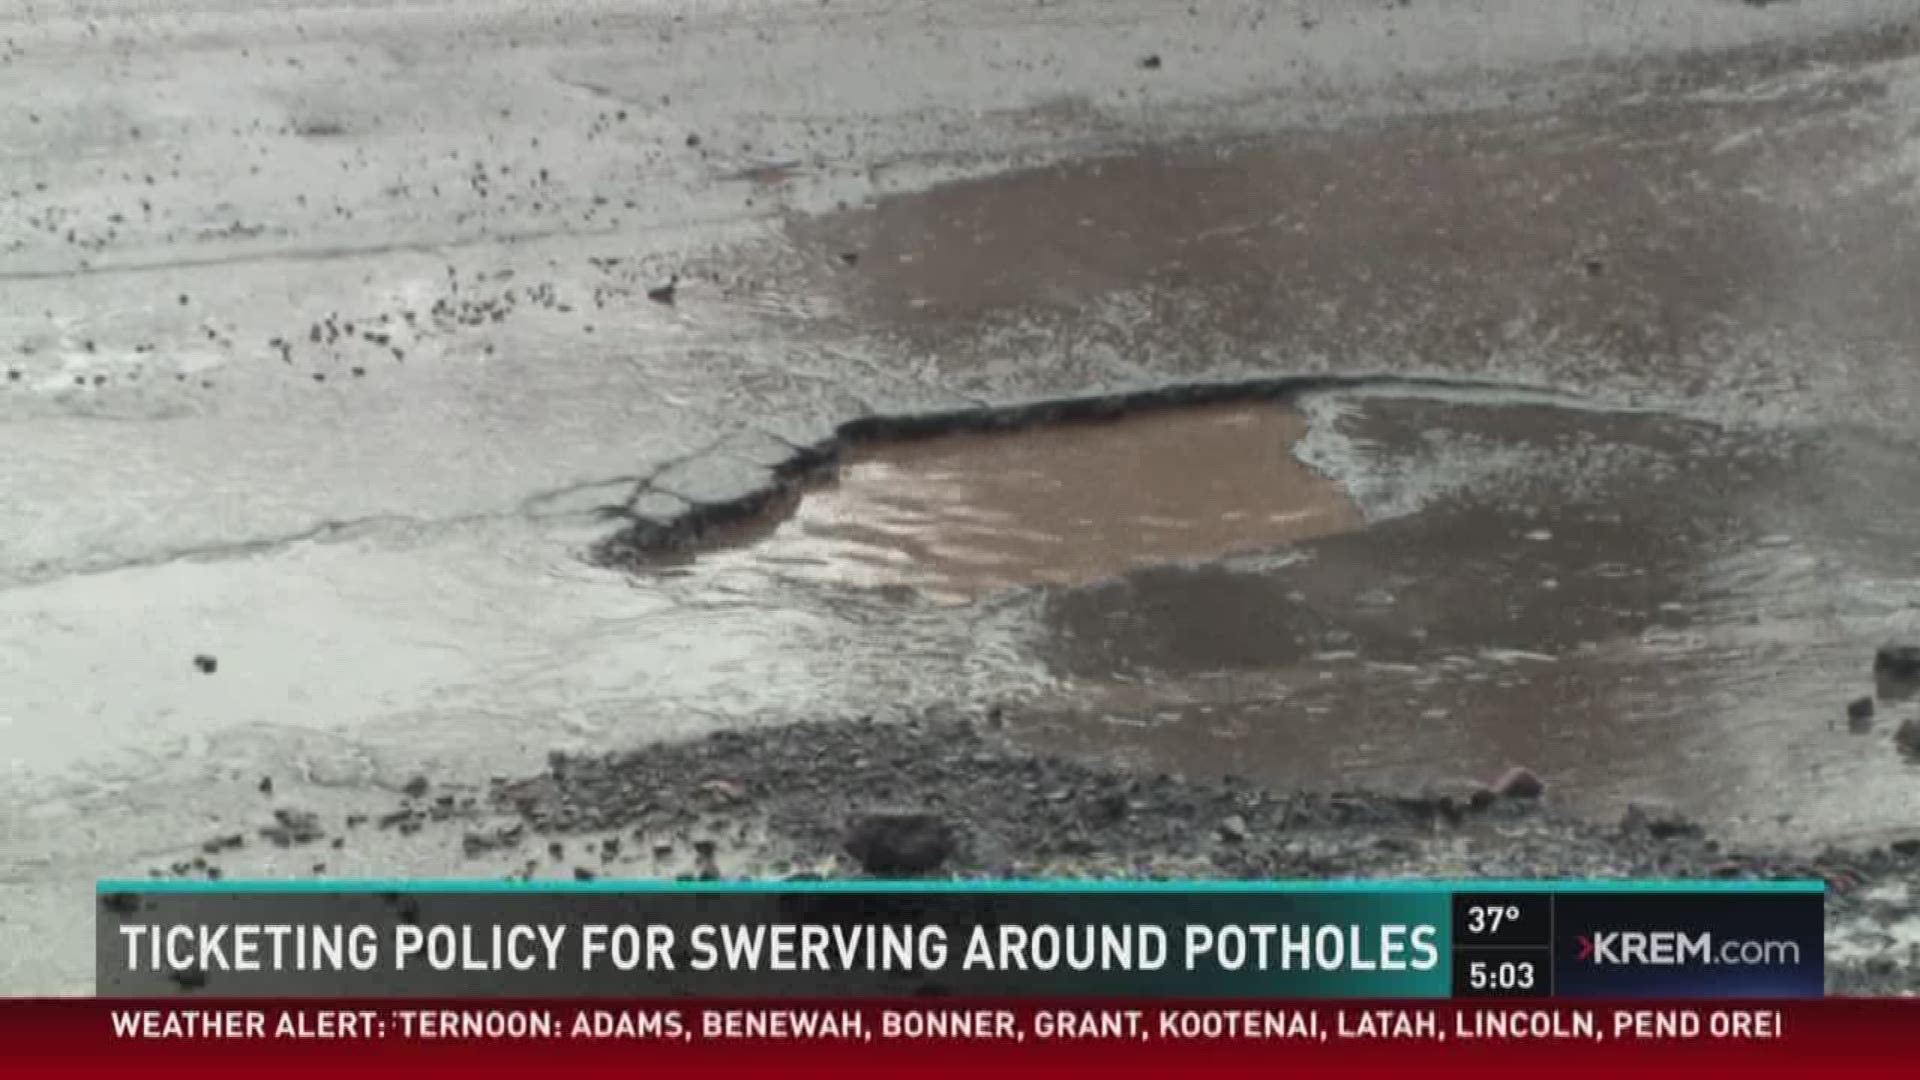 KREM 2's Lindsay Nadrich explains what traffic laws say about swerving or slowing down to avoid potholes. (2-20-17)